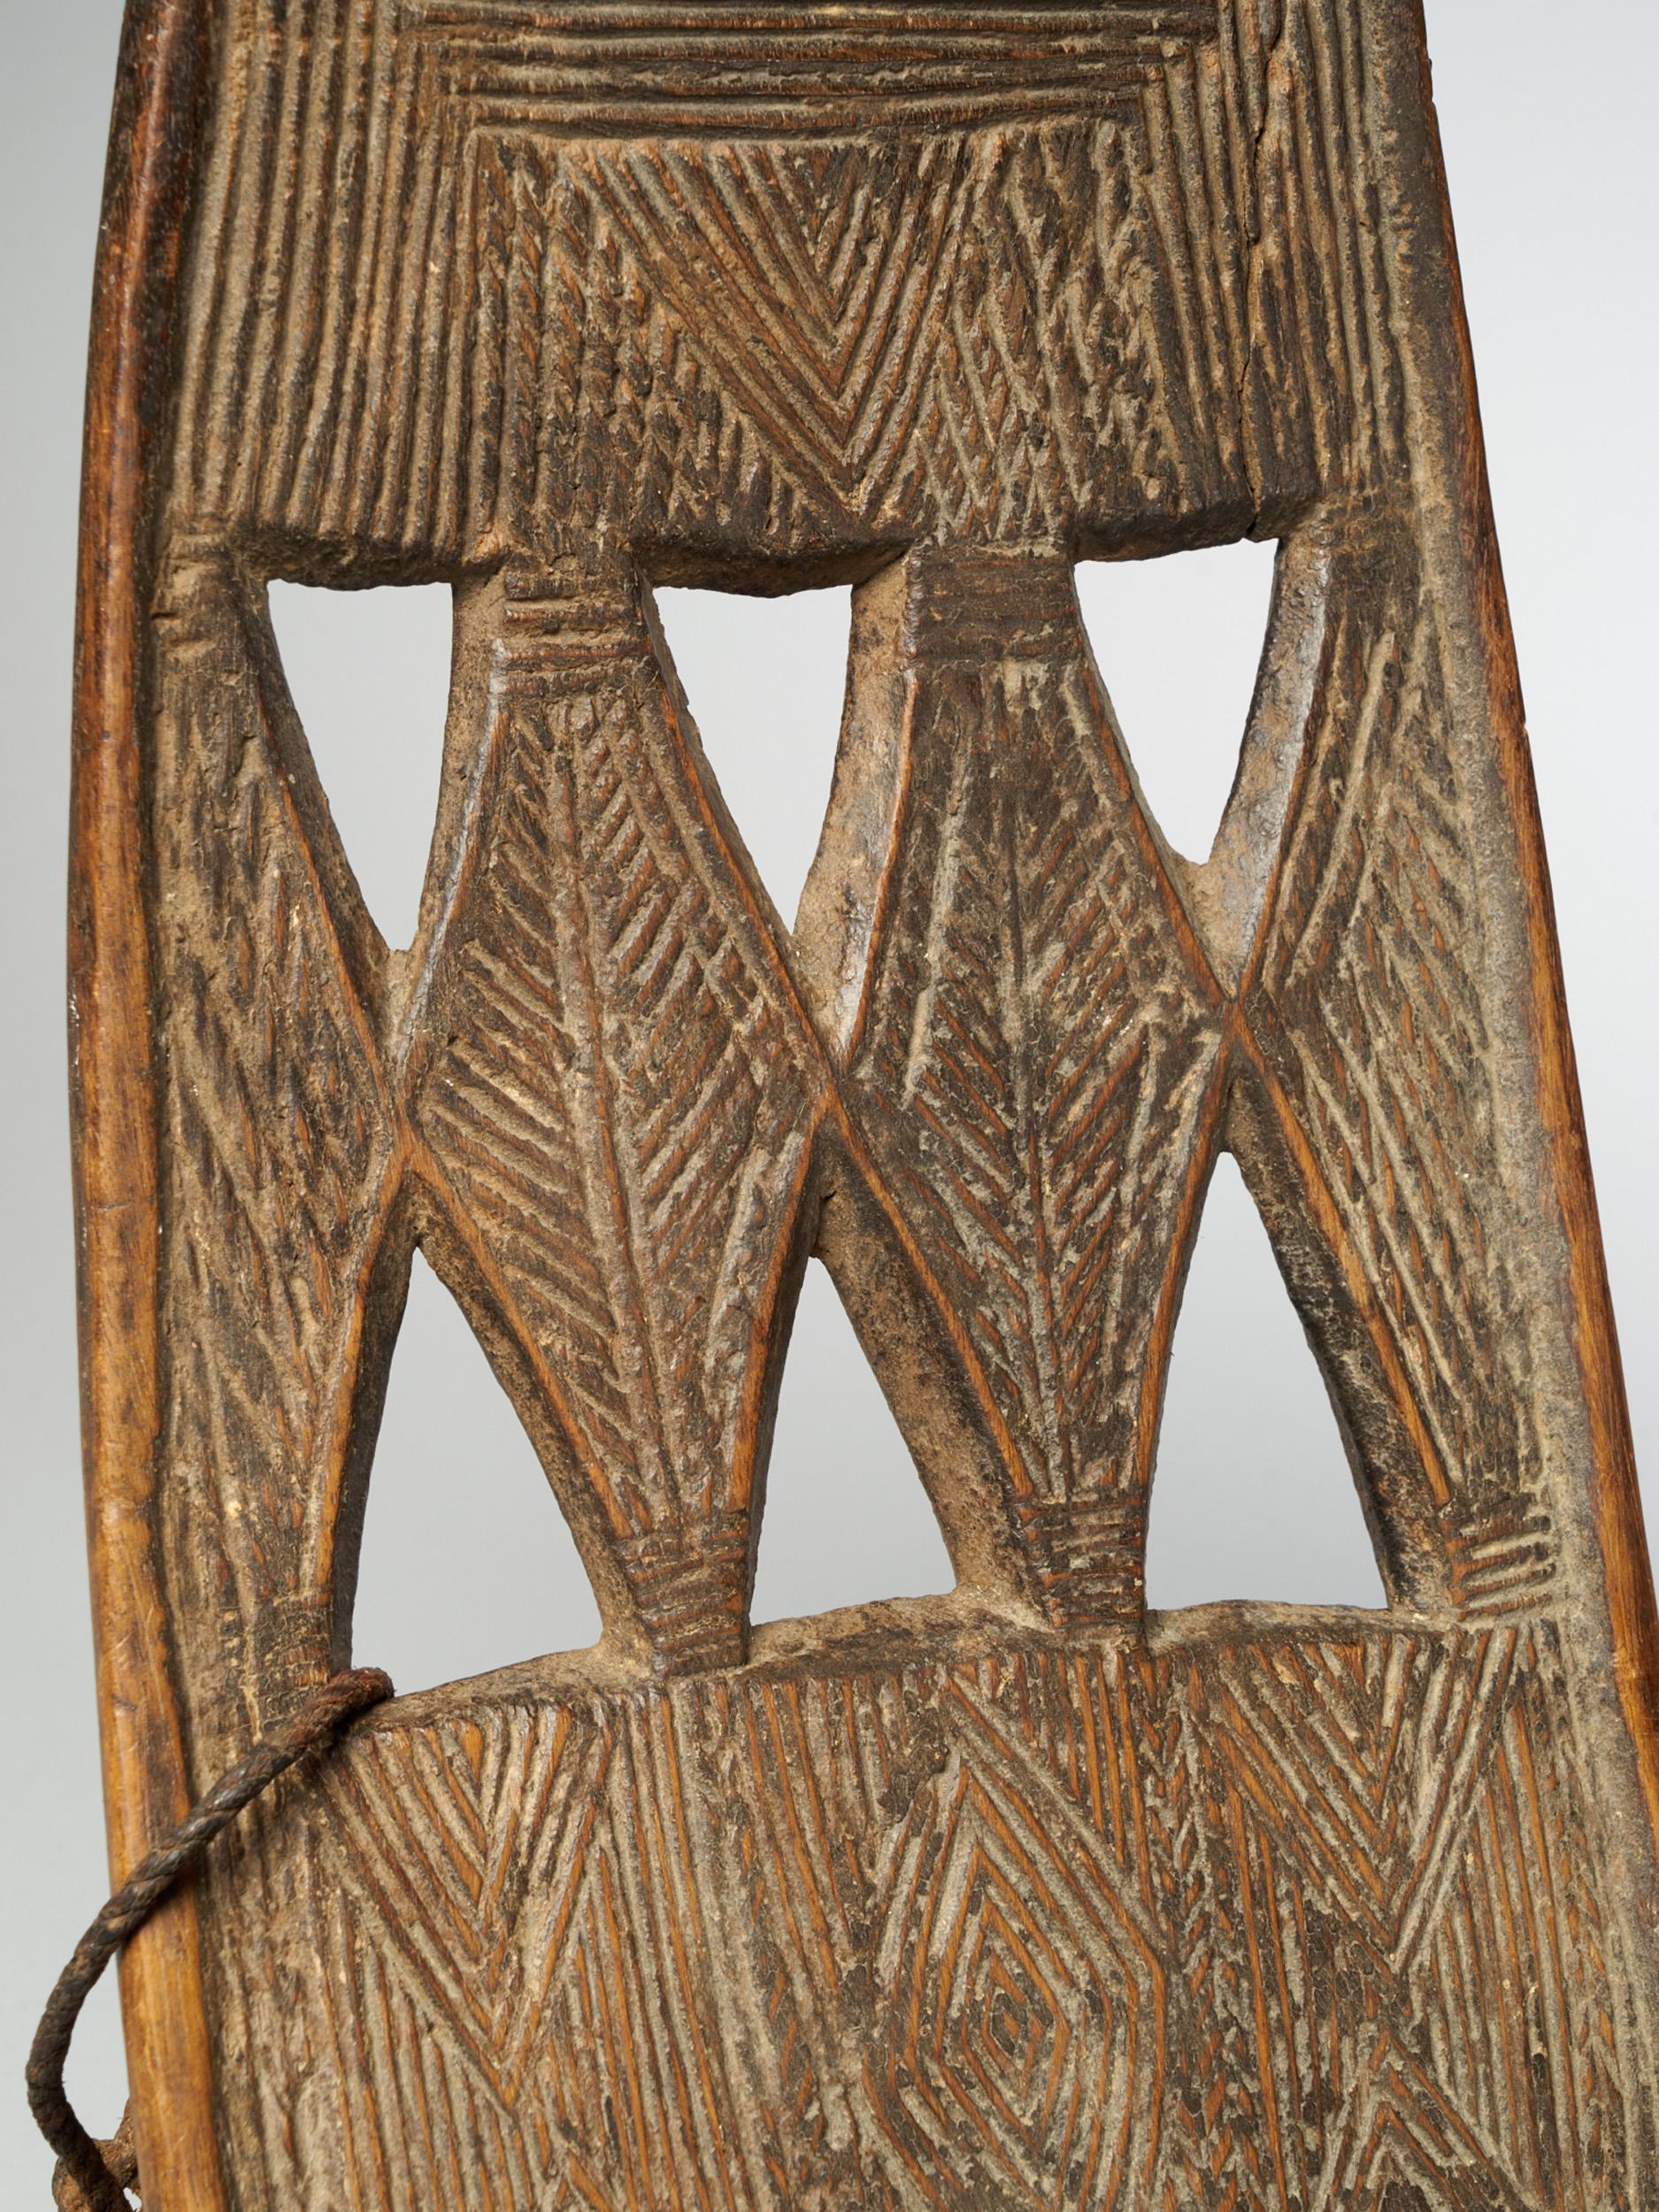 Mid-20th Century Decorated Wooden Backrest Sculptured in One Piece For Sale